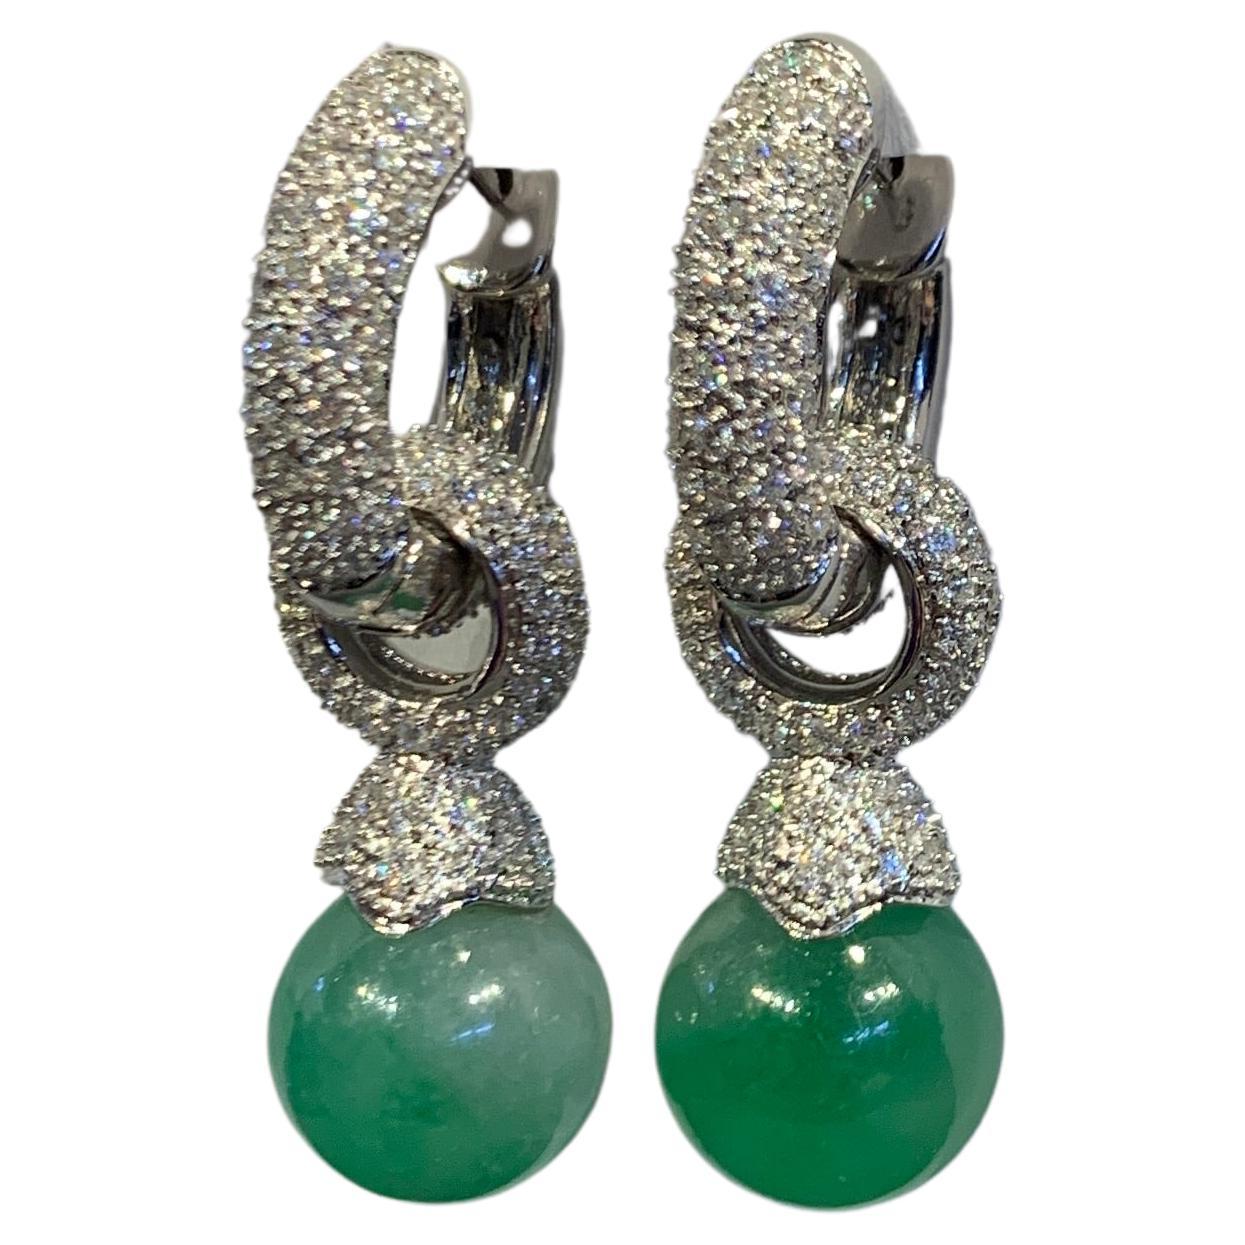 Jade & Diamond Day & Night Earrings

A pair of 18 karat white gold earrings set with approximately 3.10 carats of round cut diamonds and 2 jade beads weighing approximately 37.52 carats. The jade bead attachments are removable, allowing the earrings